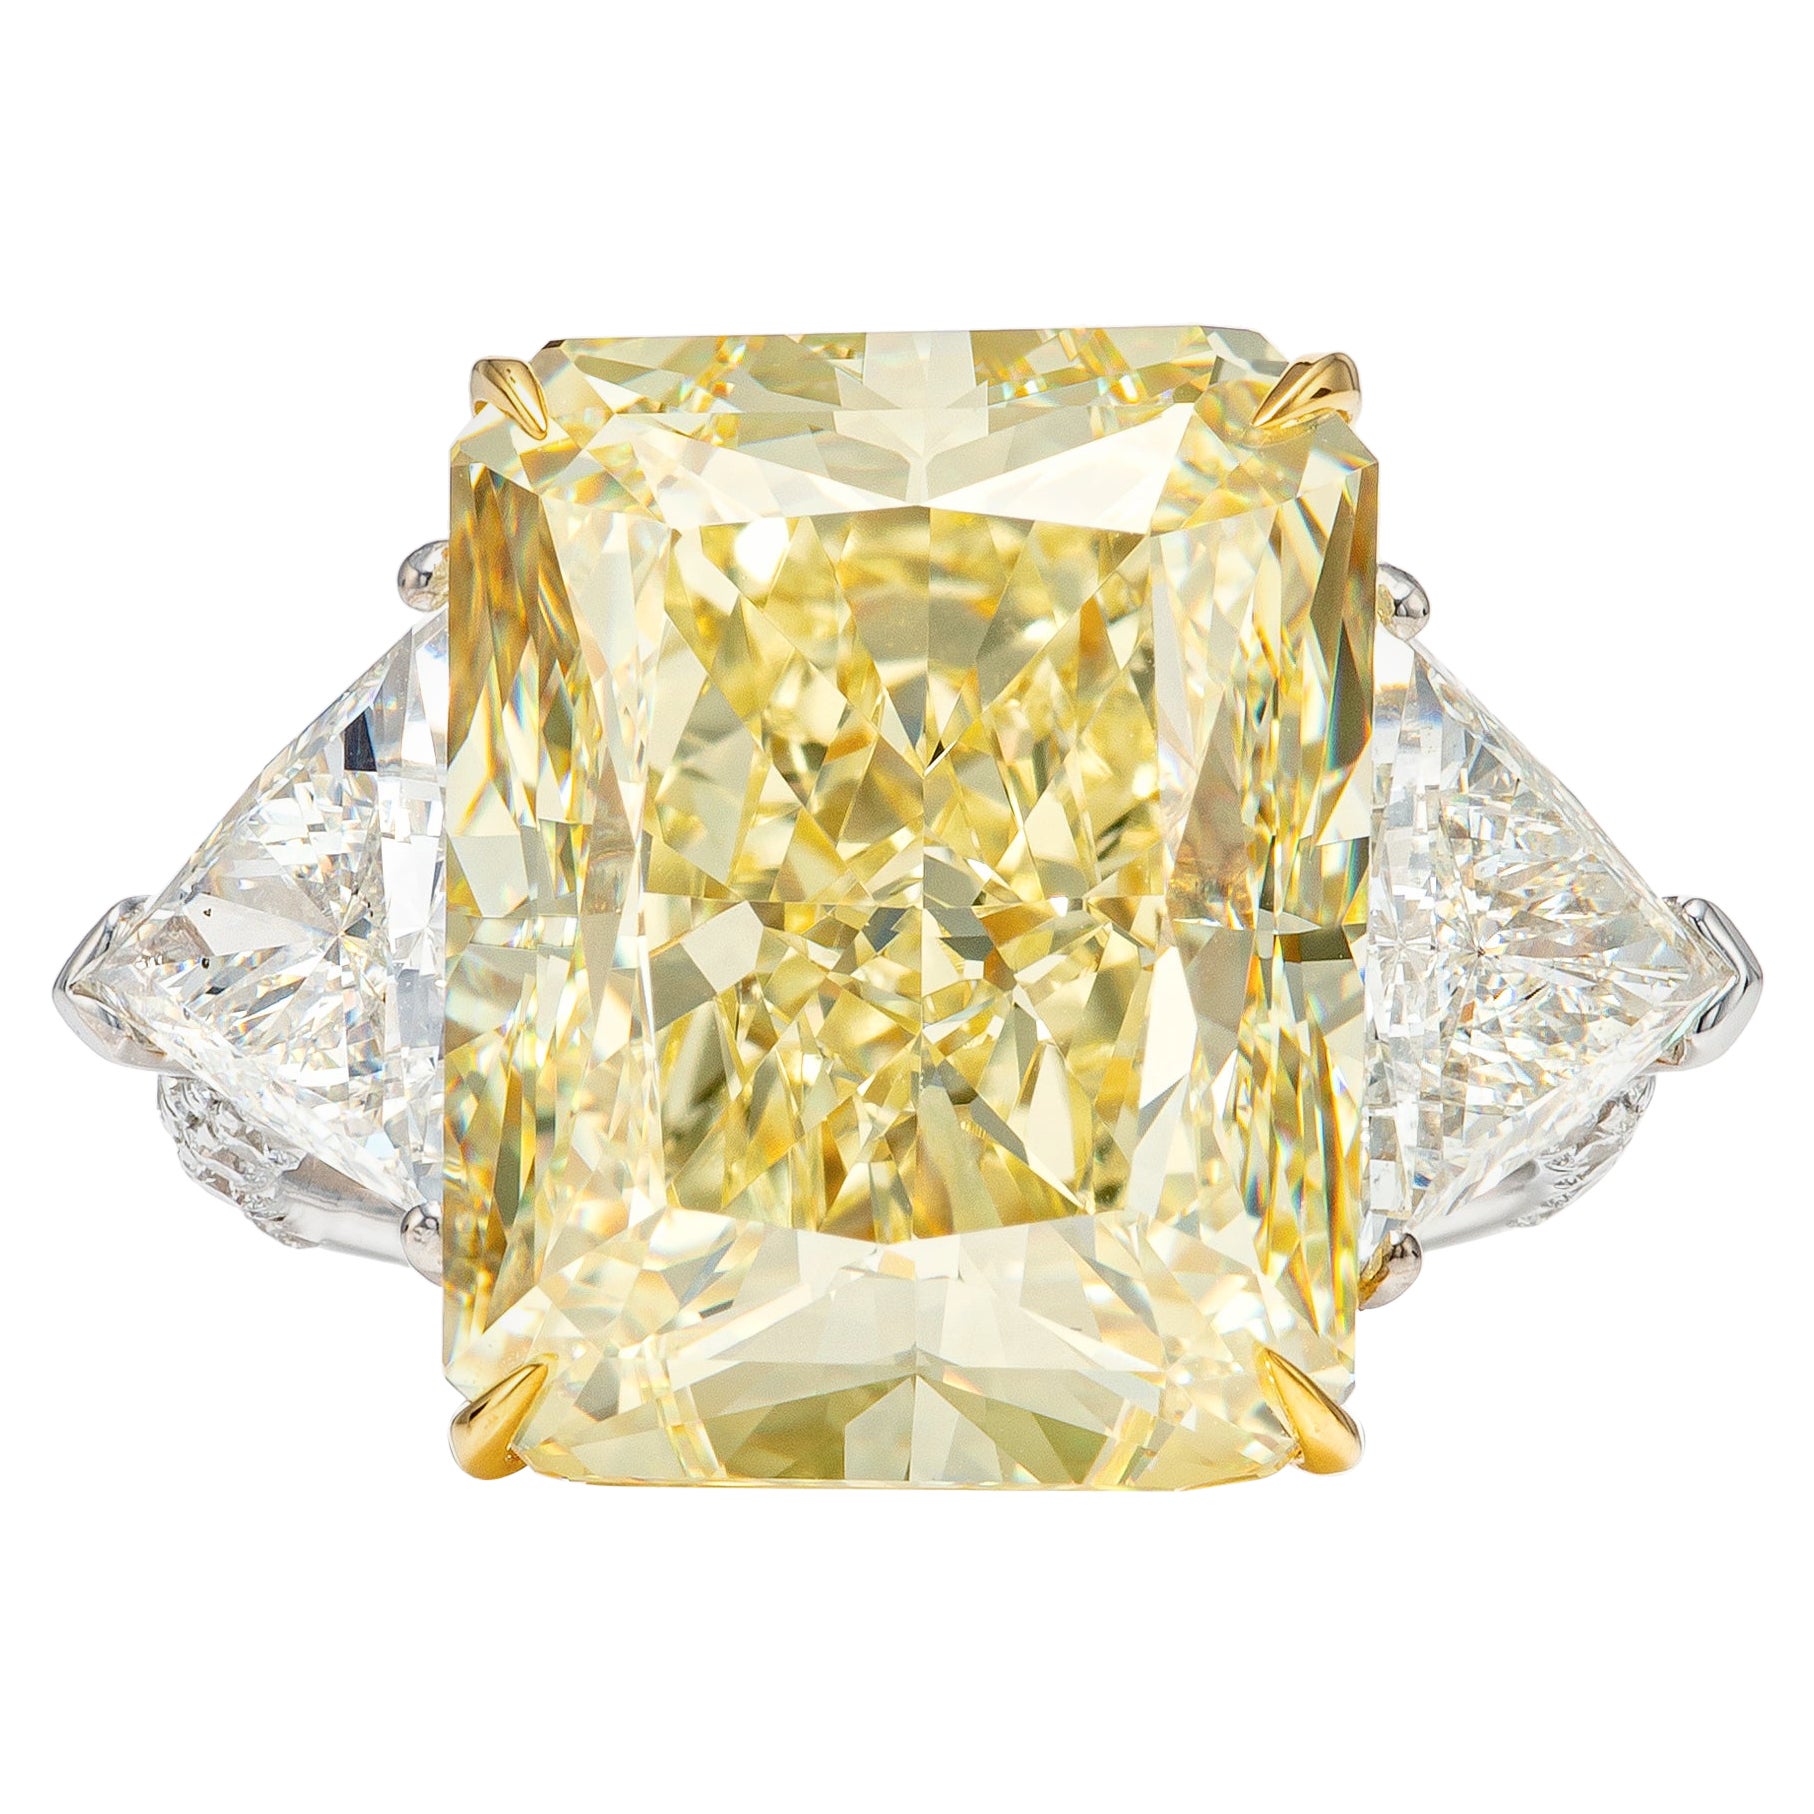 GIA Certified 16.73 Carat Fancy Light Yellow Diamond Ring in 18k Gold For Sale